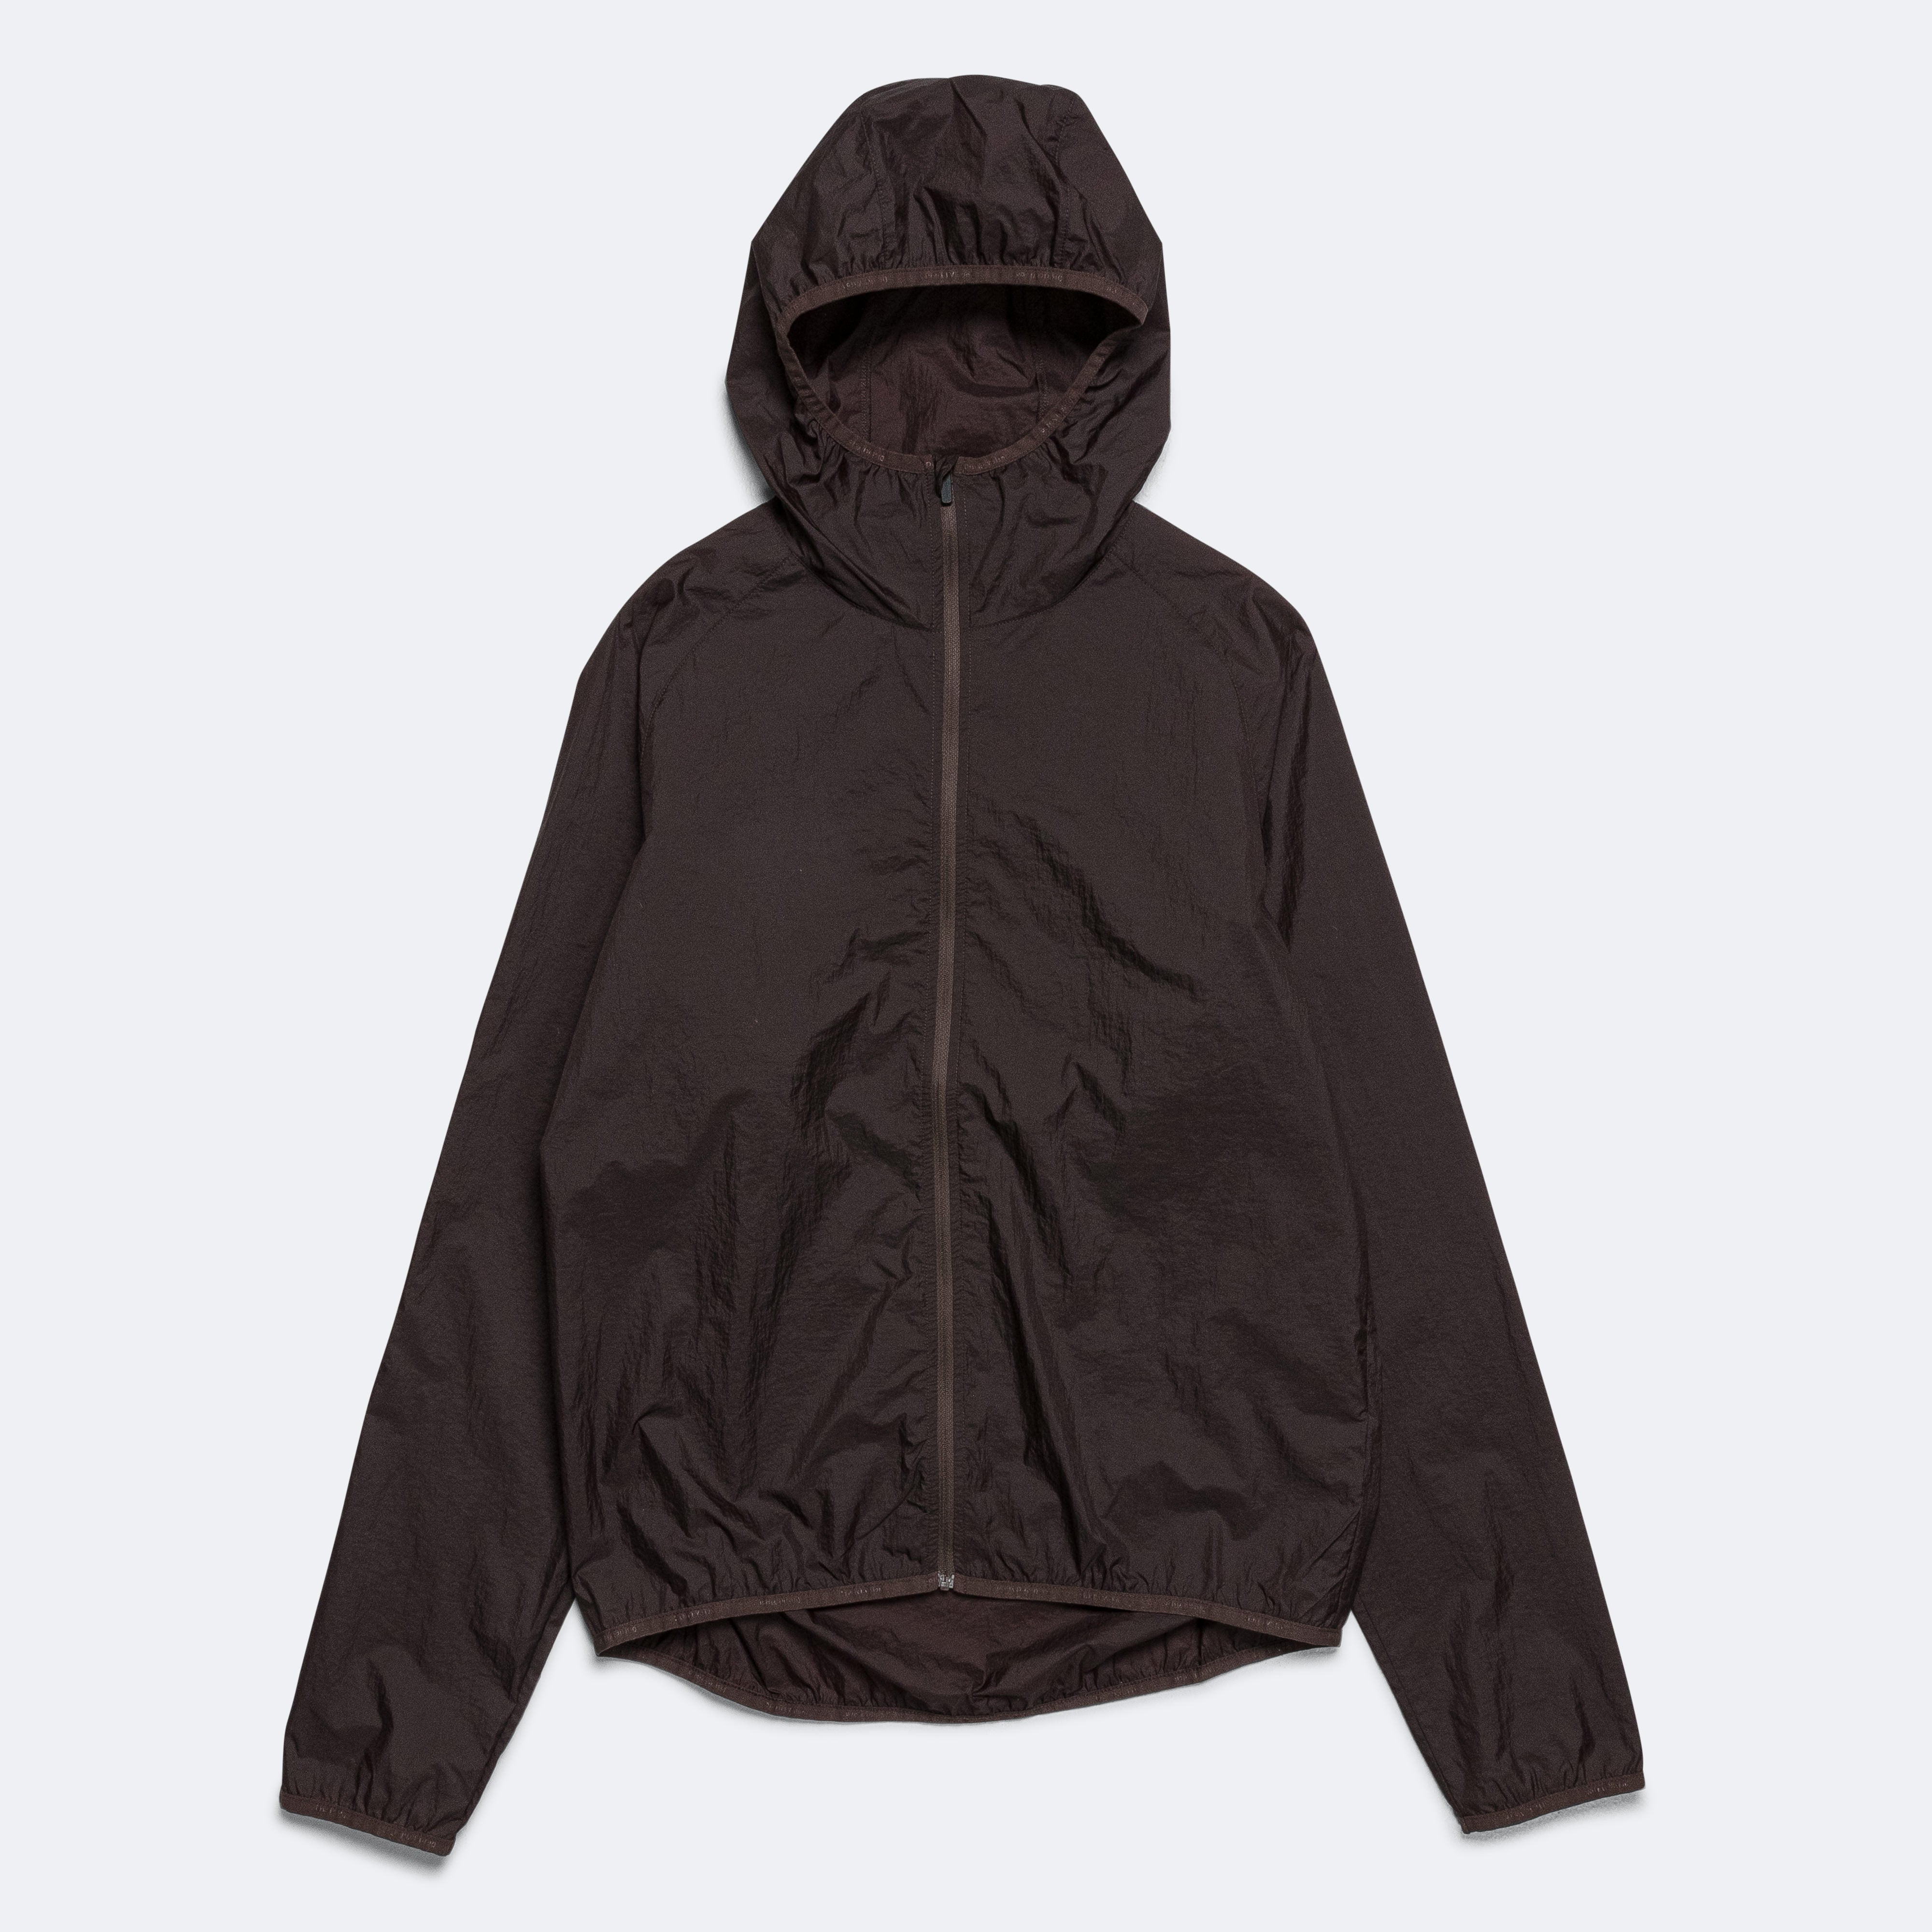 District Vision Mens Ultralight DWR Jacket - Cacao